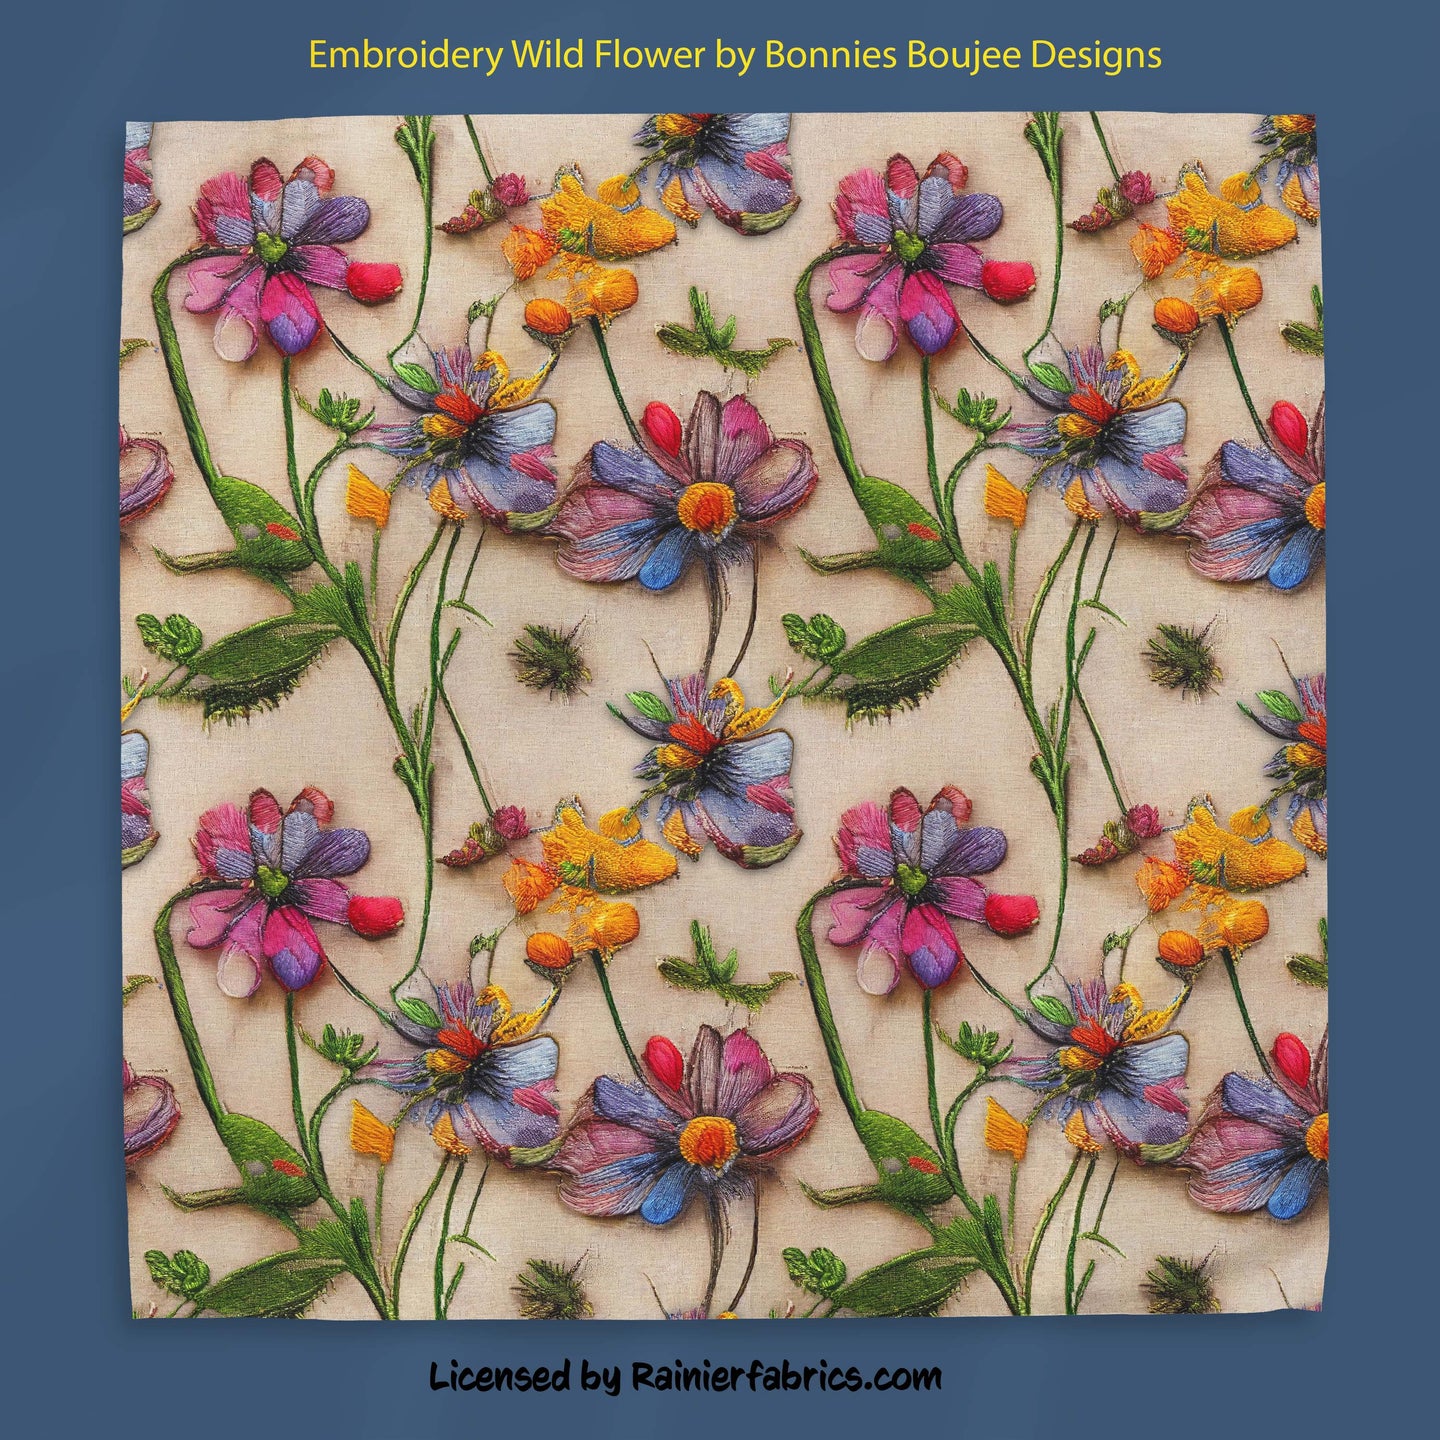 Embroidery Flowers 2 ways by Bonnie's Boujee Designs - 2-5 business days to ship - Order by 1/2 yard